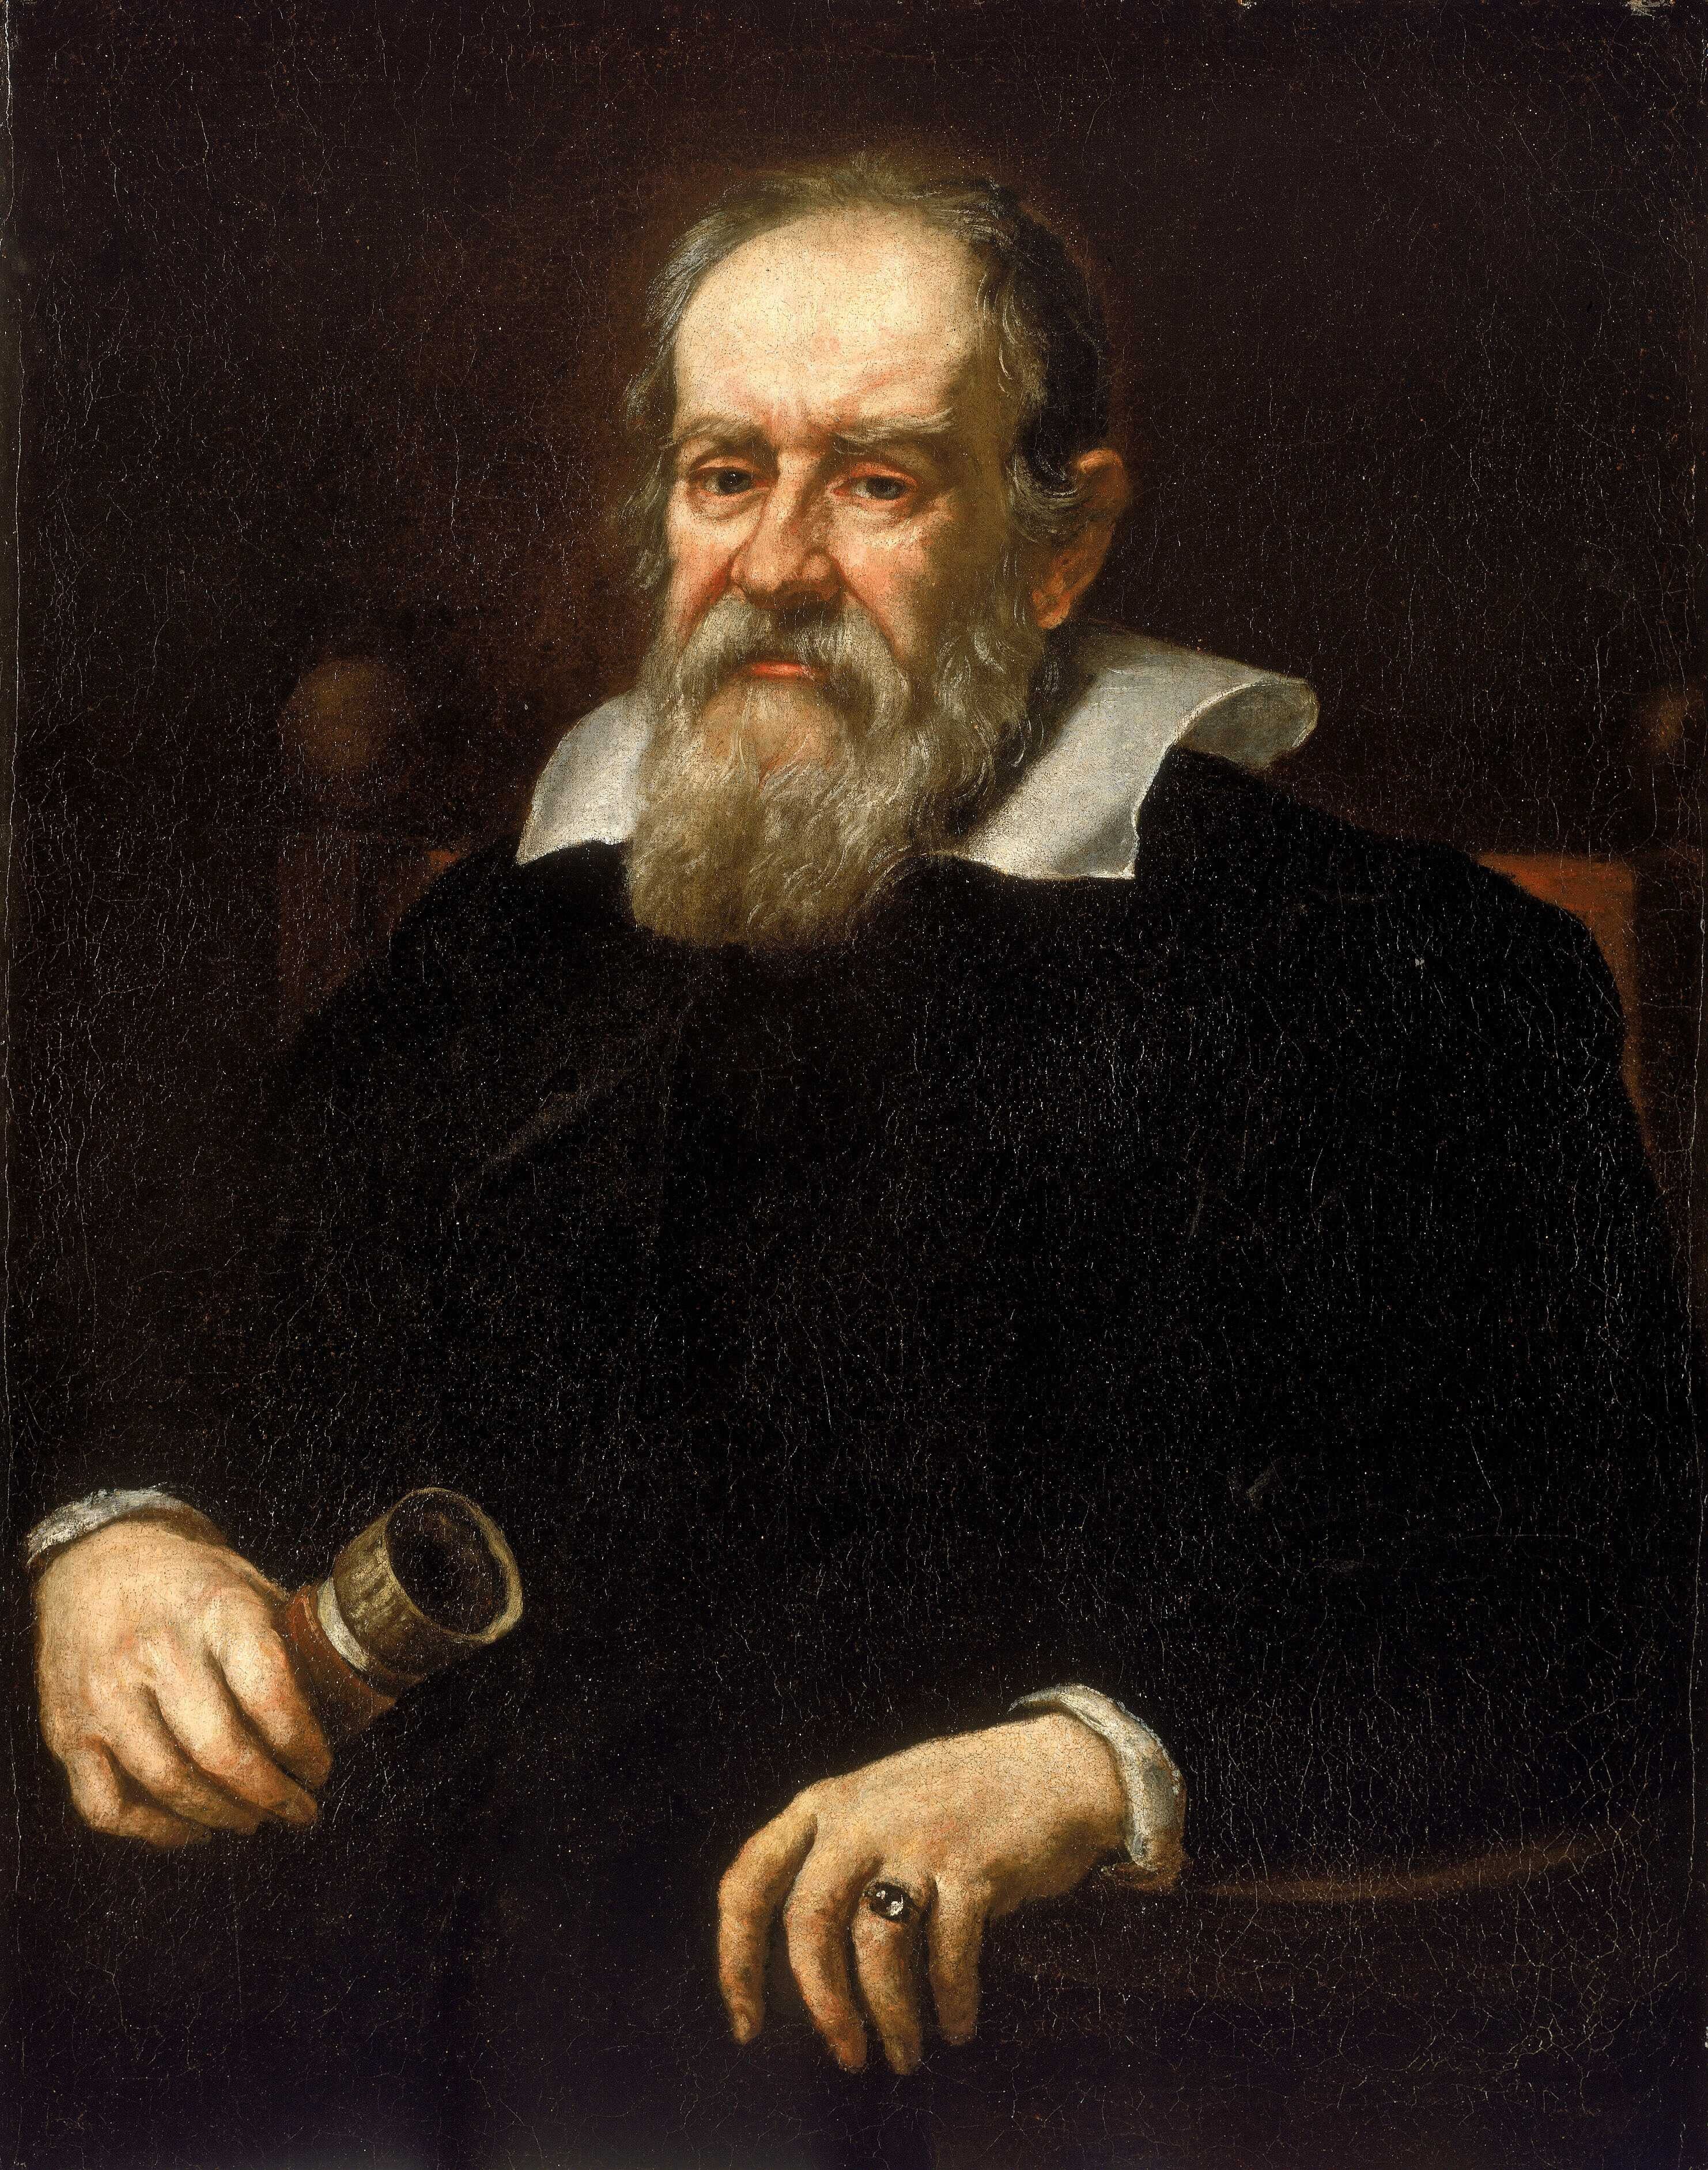 Galileo painted by Justus Sustermans c. 1640, one of the most celebrated portraits of the mathematician and astronomer who many see as the founder of modern science.